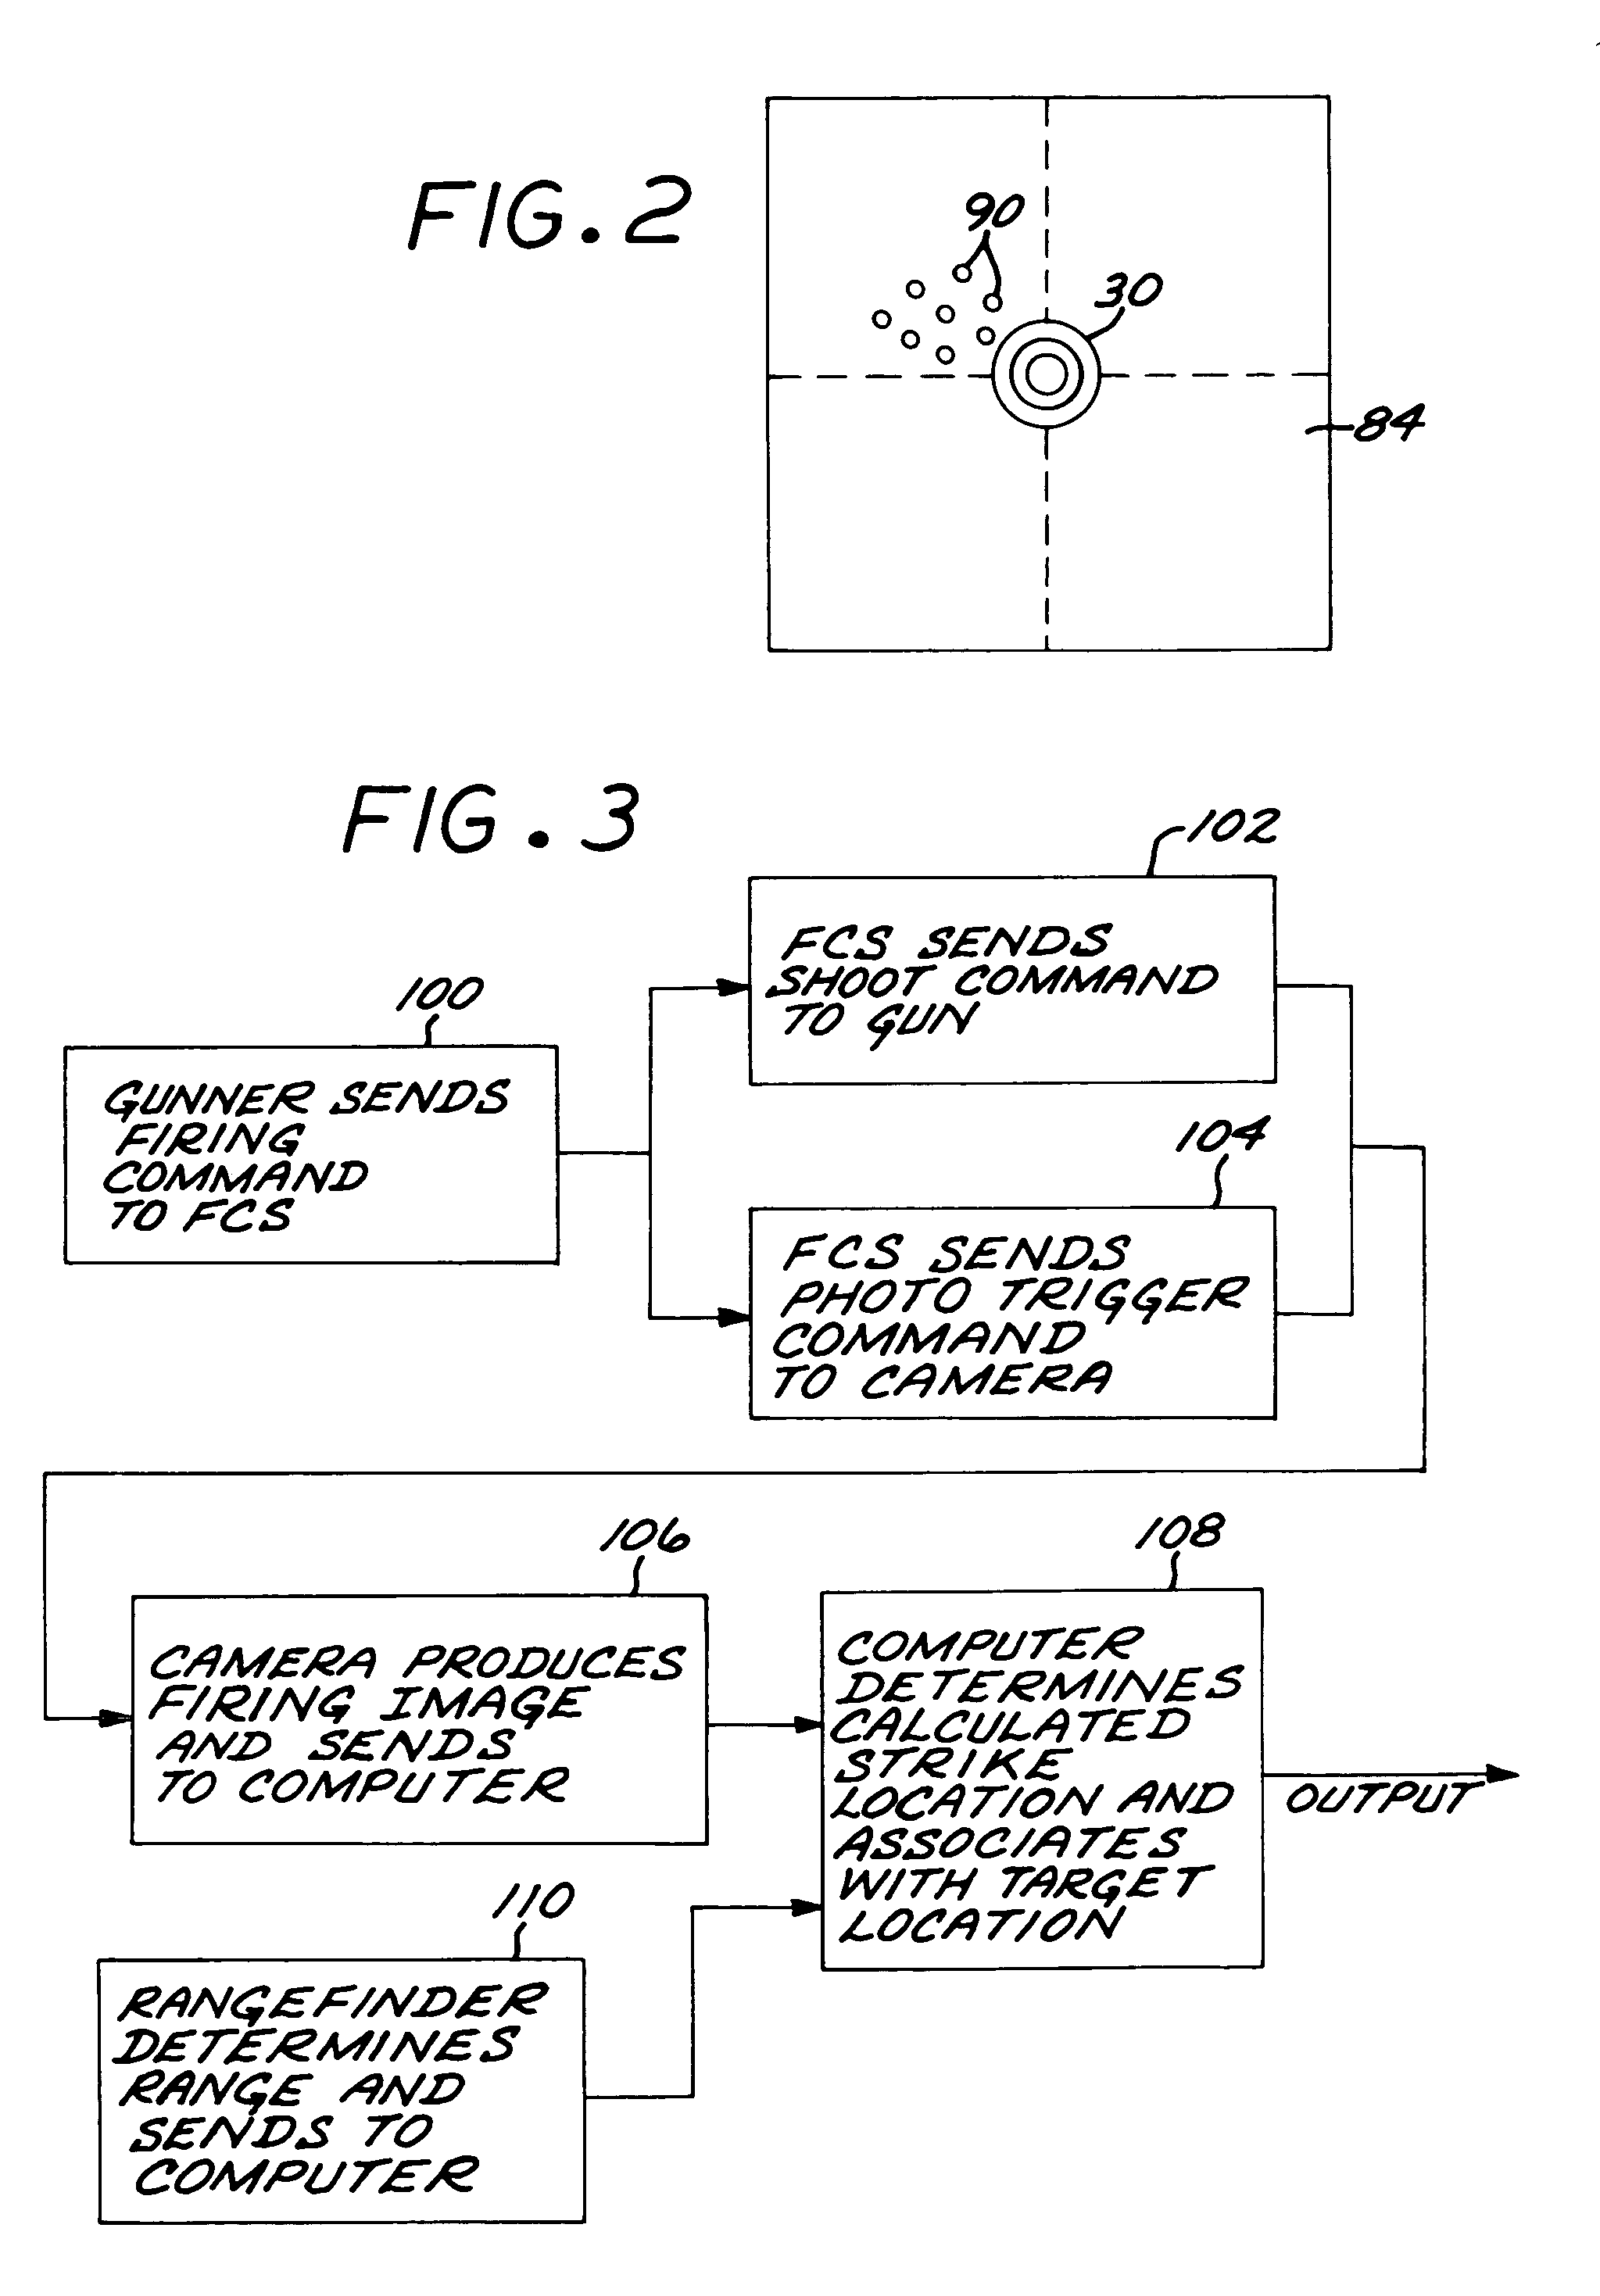 Dynamic pointing accuracy evaluation system and method used with a gun that fires a projectile under control of an automated fire control system